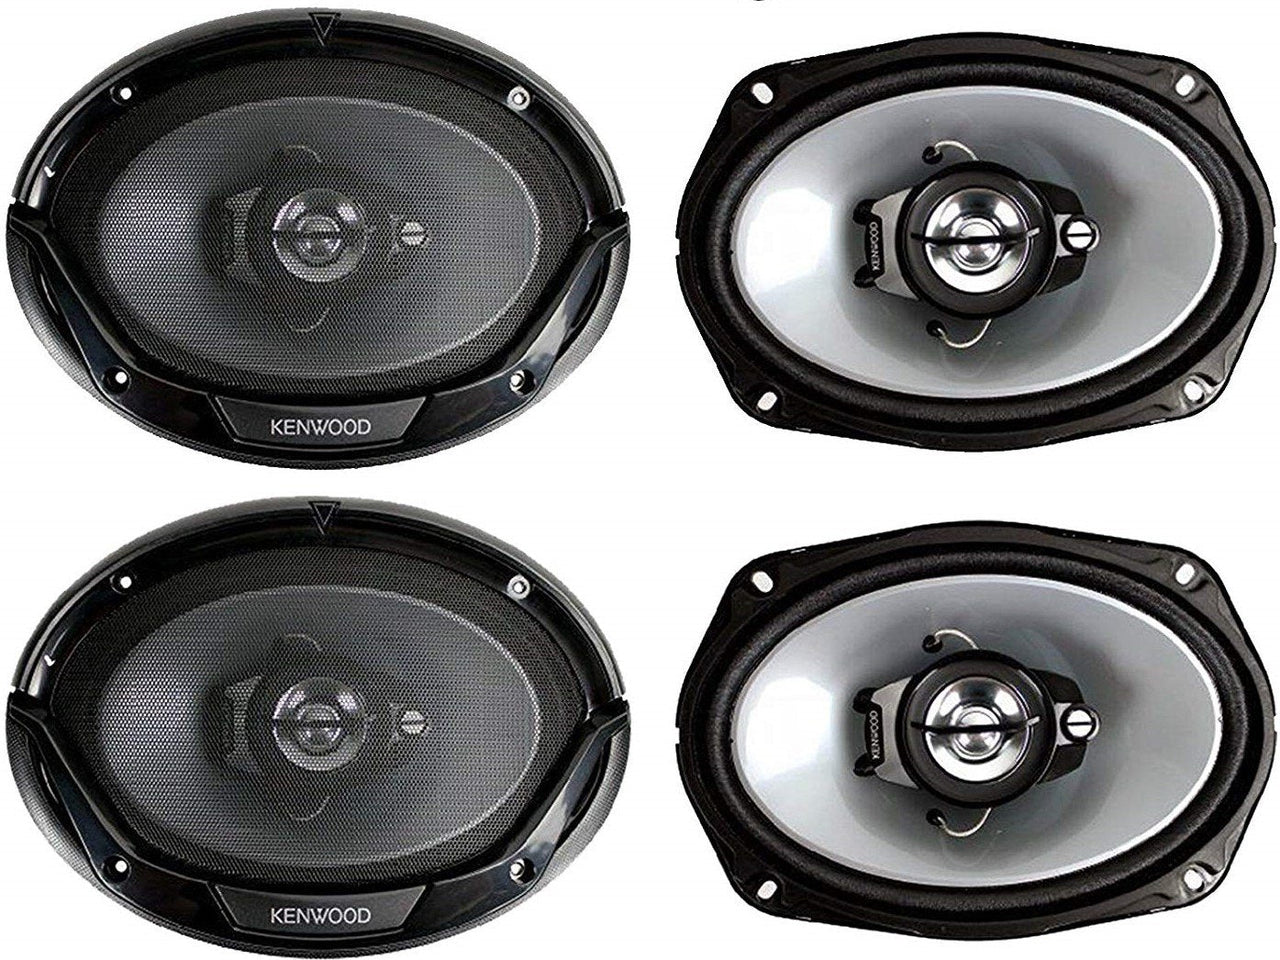 4 Kenwood 6" x 9" 400W 3Way Car Audio Flush Mount Coaxial Stereo Speakers 2Pairs